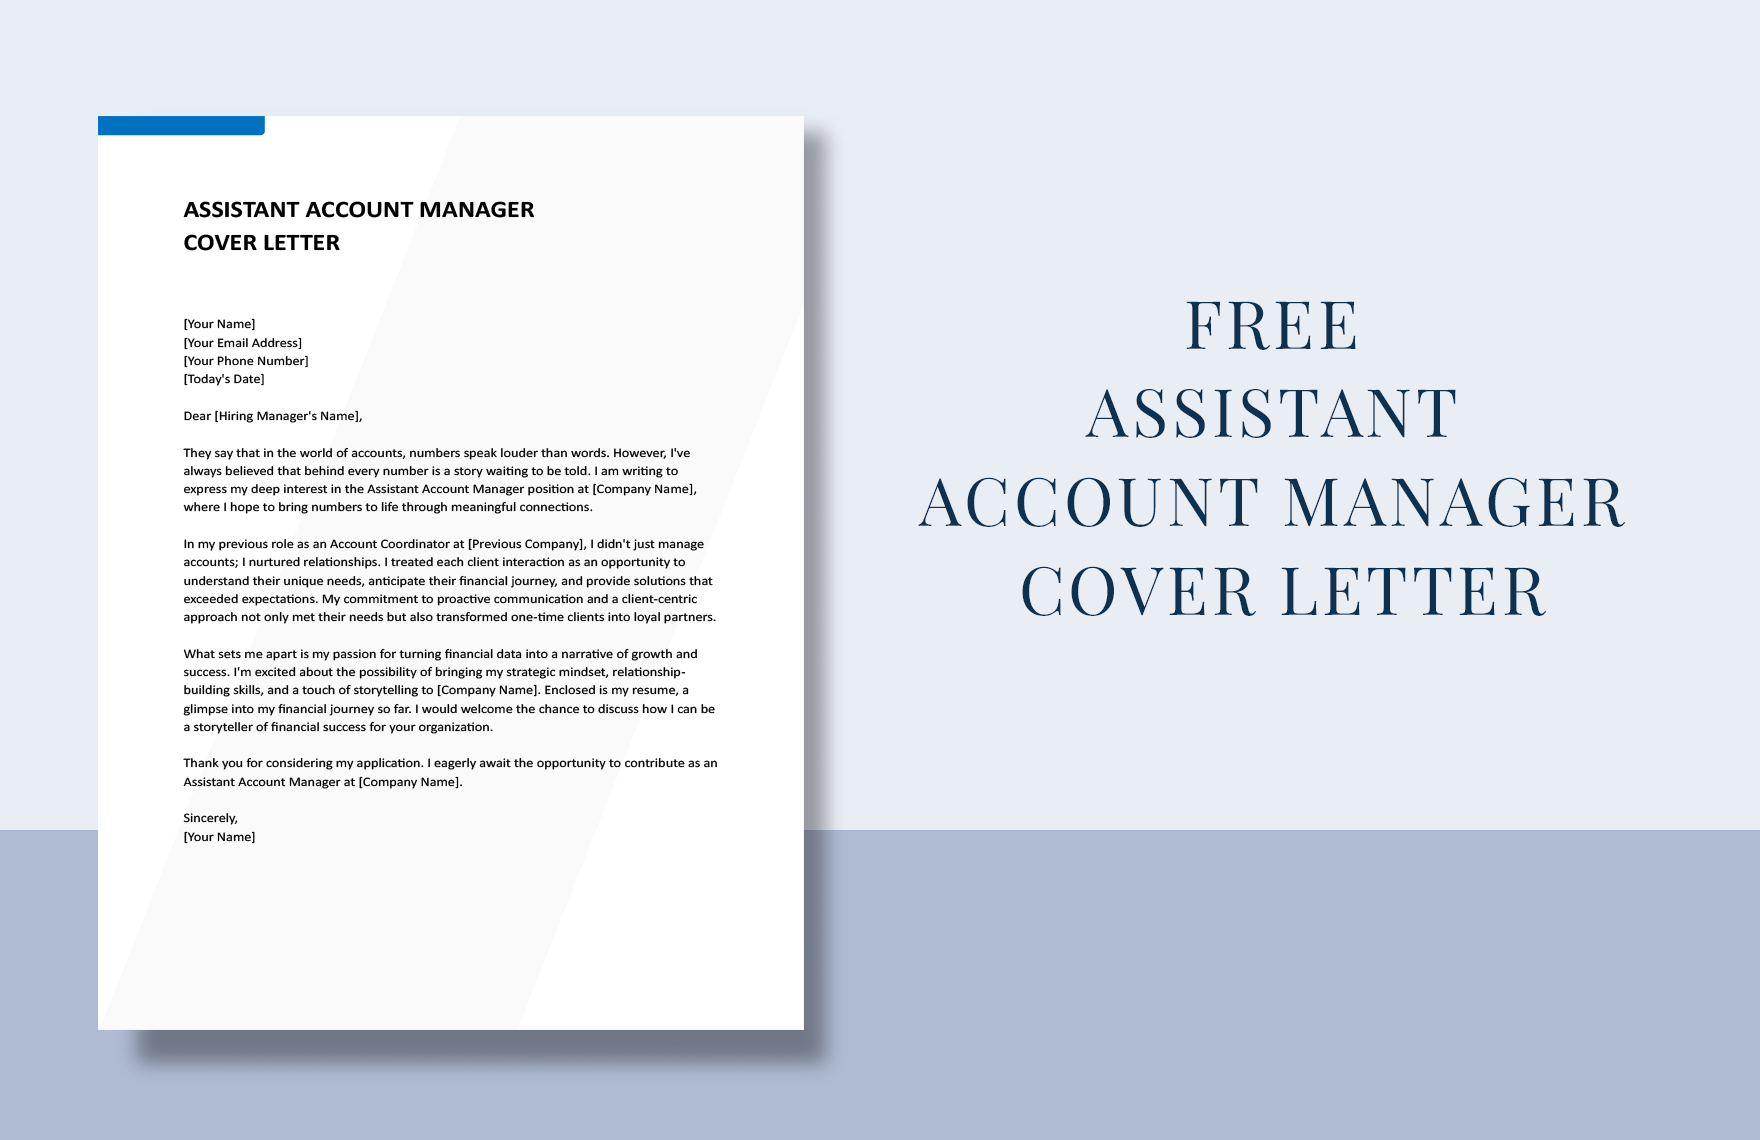 Assistant Account Manager Cover Letter